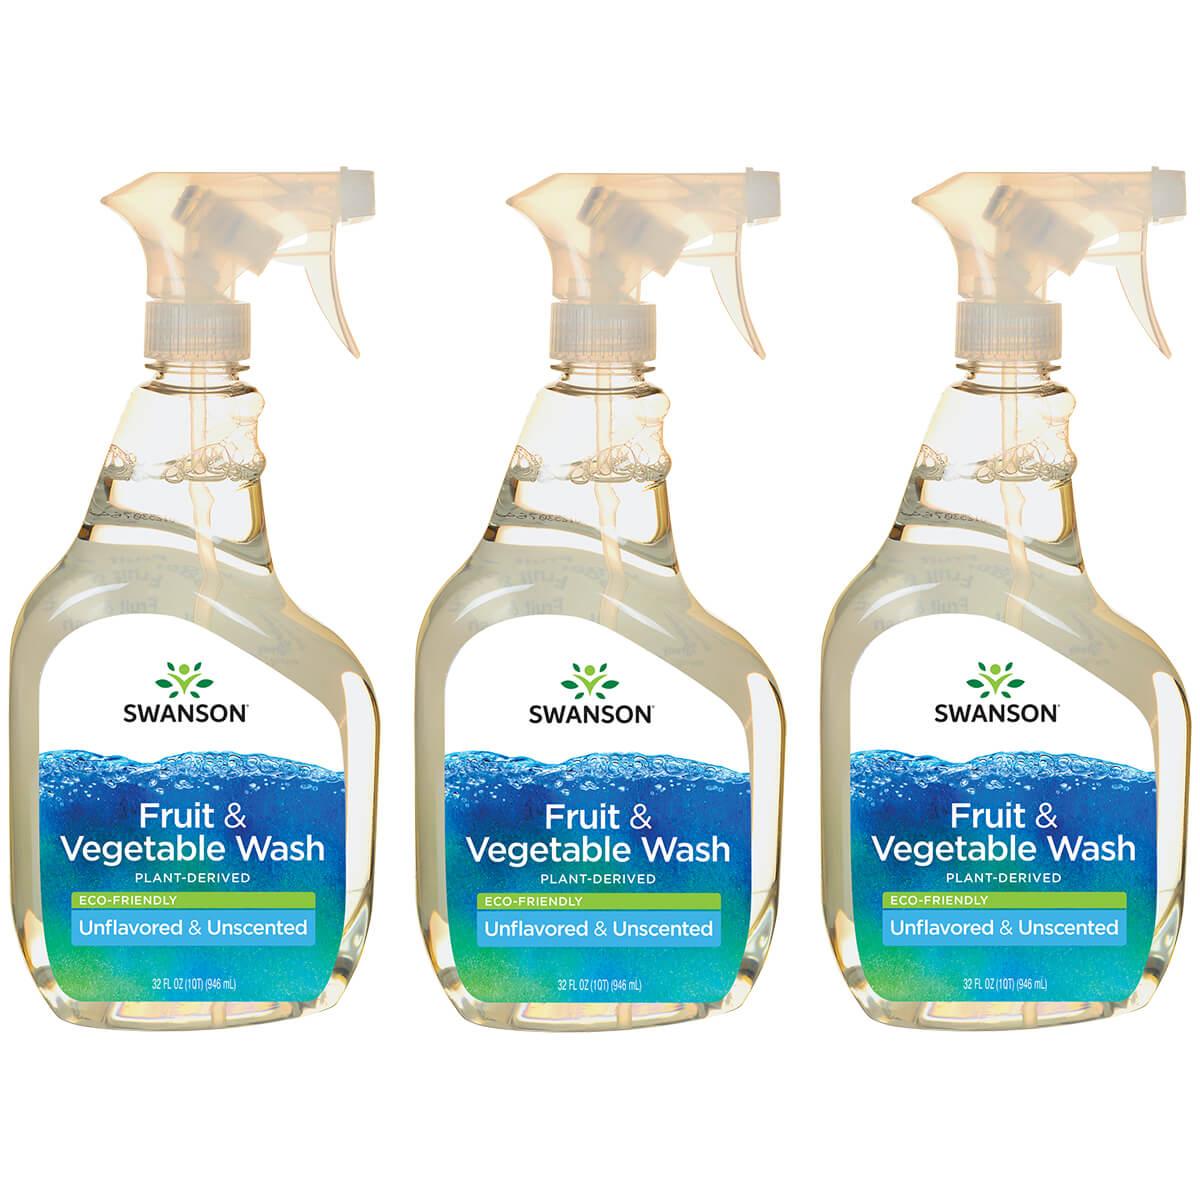 Swanson Healthy Home Fruit & Vegetable Wash - Eco-Friendly Unflavored Unscented 3 Pack 32 fl oz Liquid